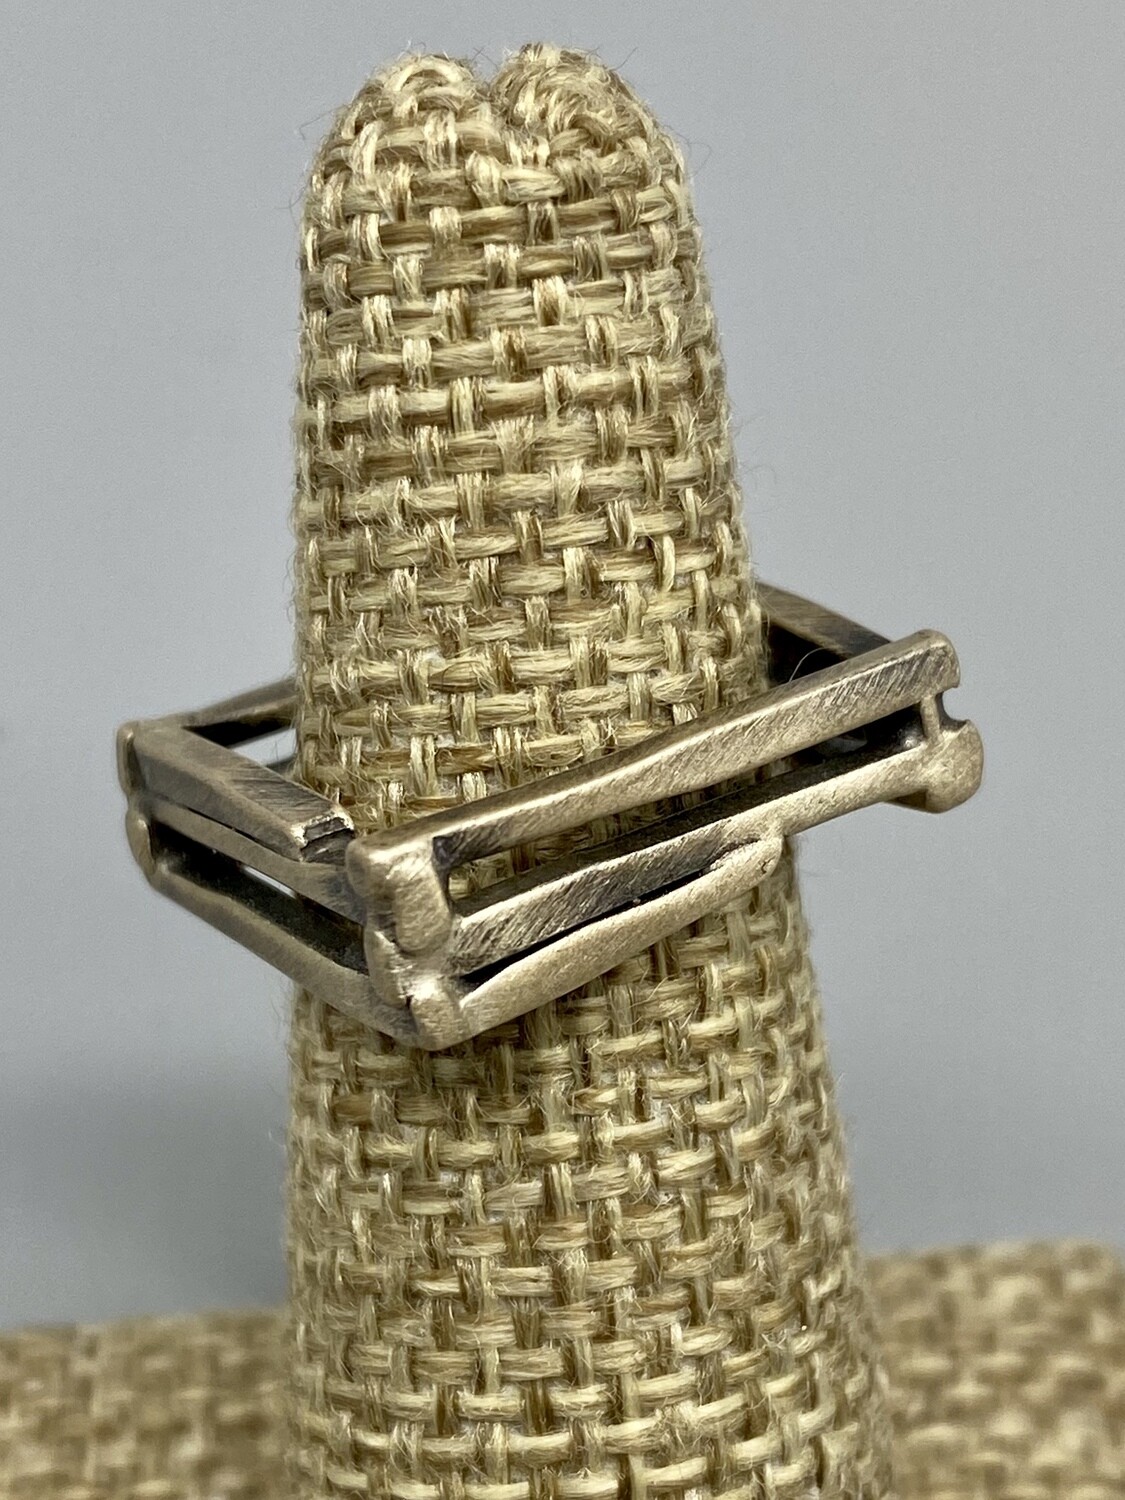 Sz 7 Brushed, Oxidized Sterling Silver Square Ring - Terri Logan - Richmond IN 